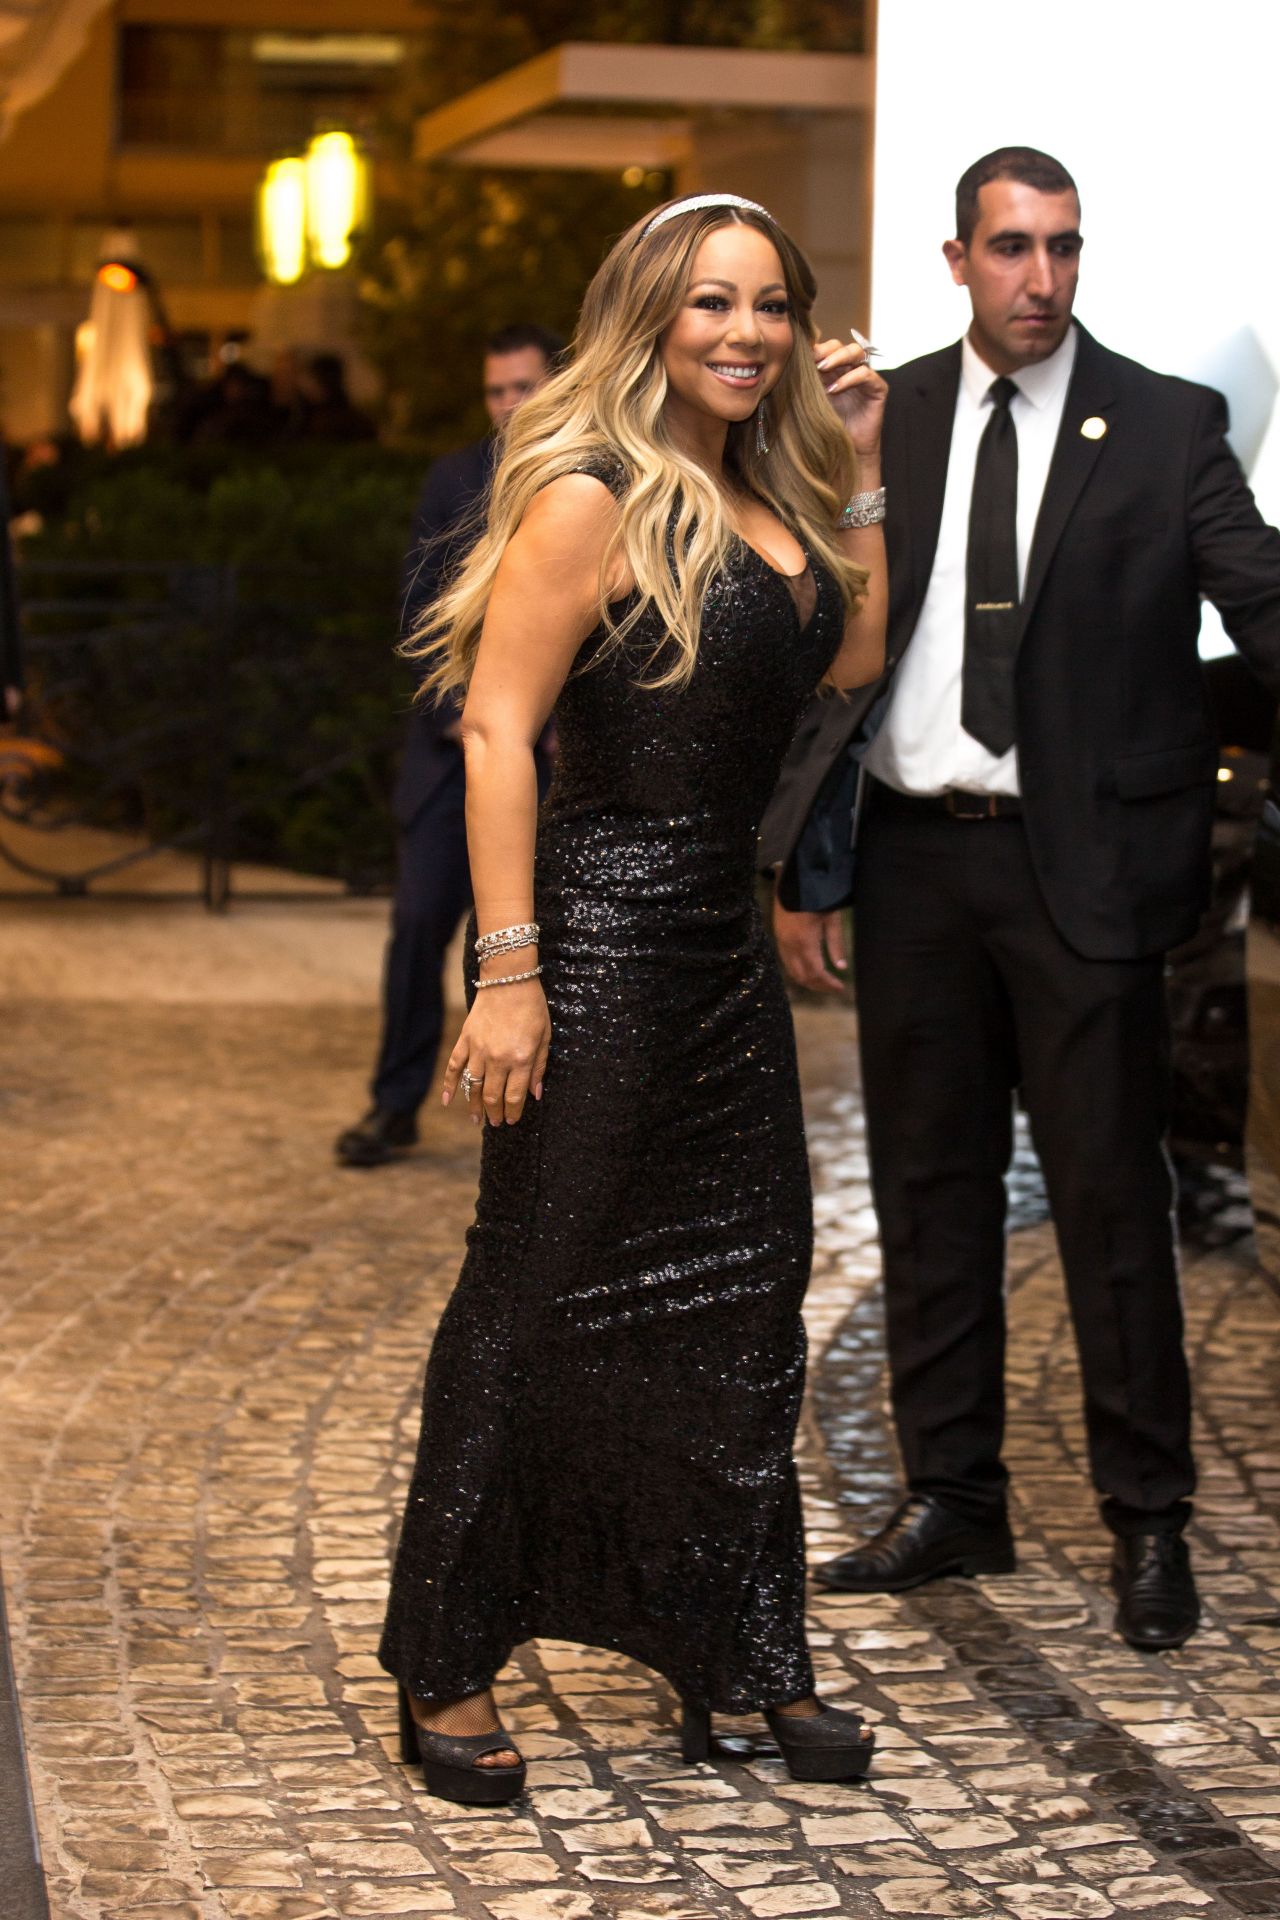 mariah-carey-outside-the-martinez-hotel-in-cannes-05-17-2019-2.jpg